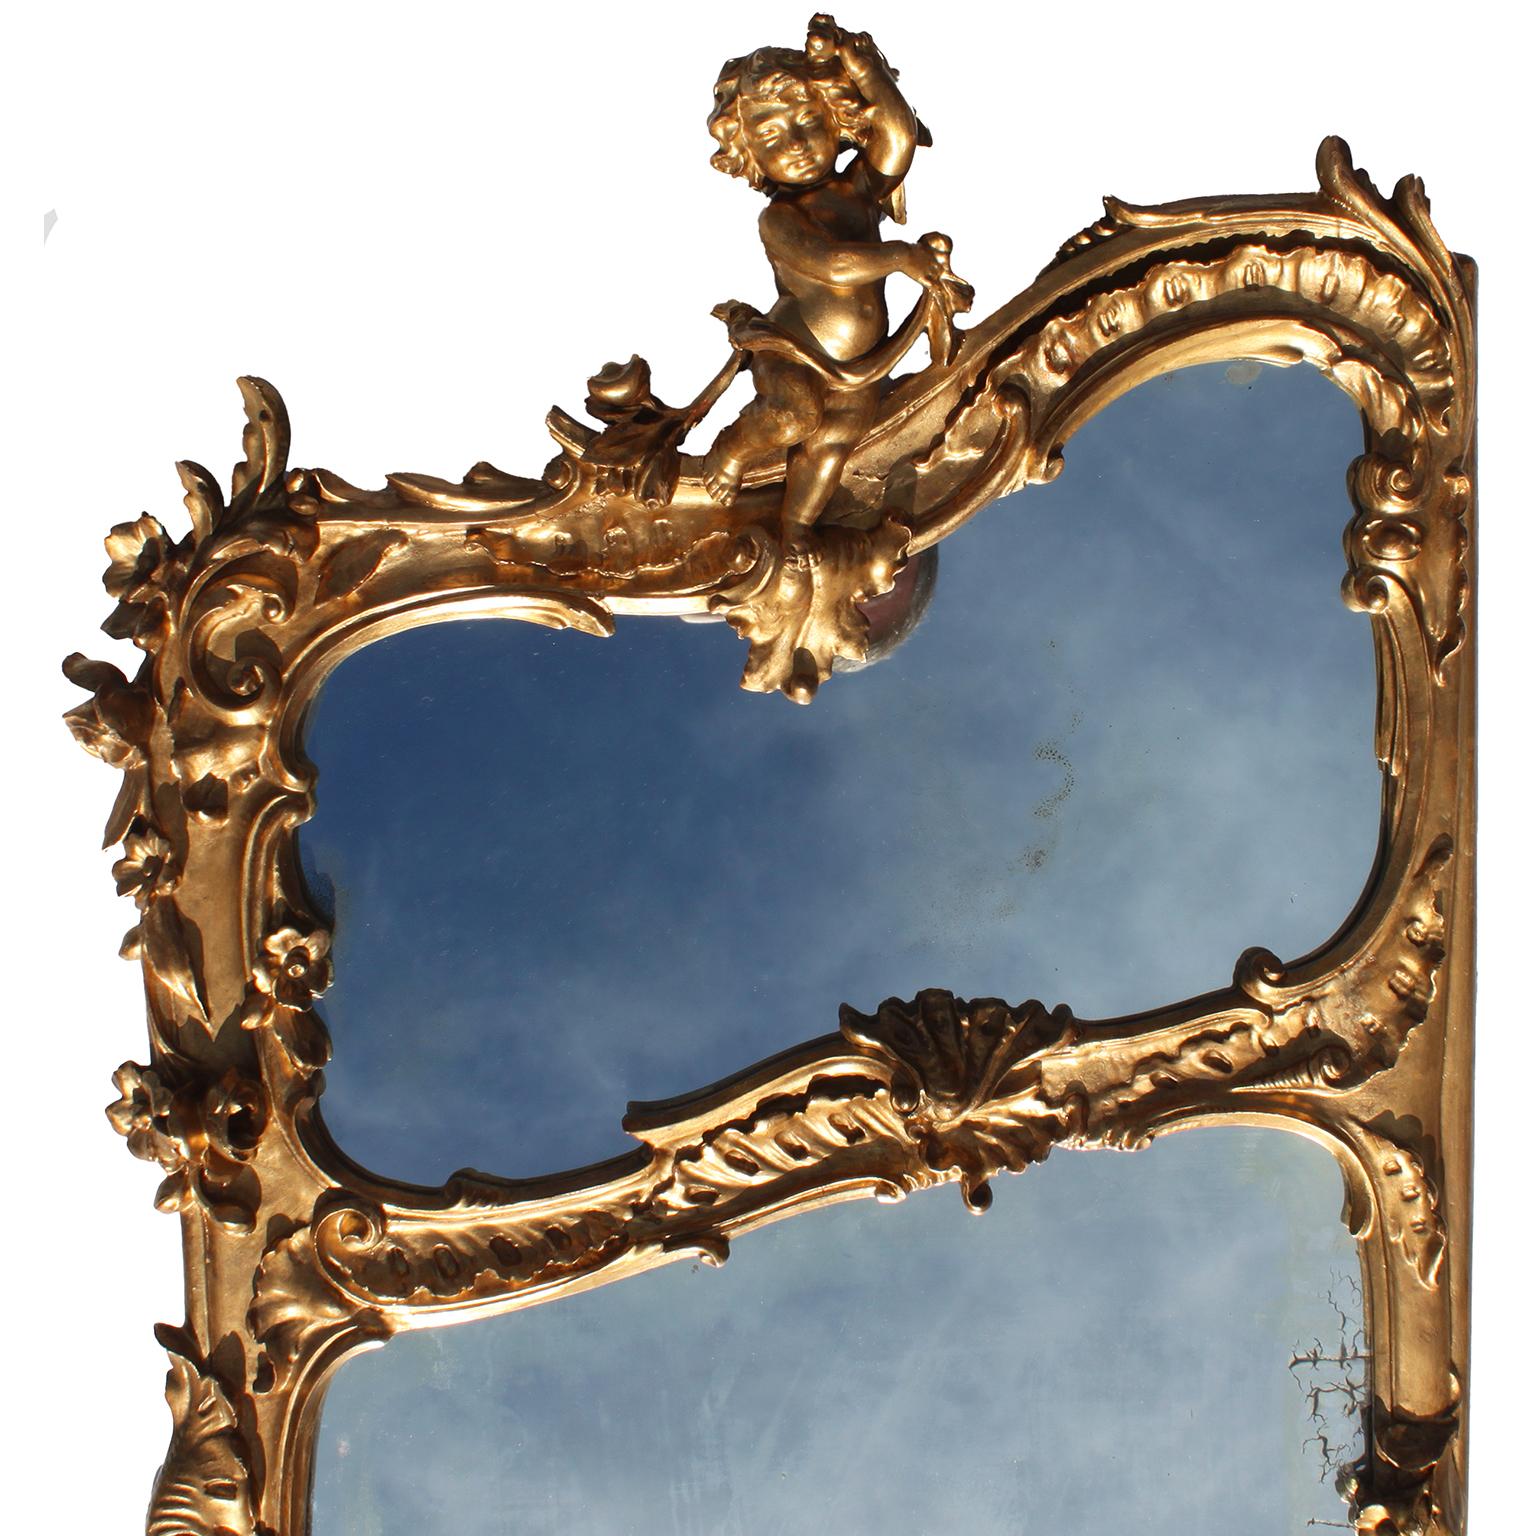 Early 20th Century Whimsical French 19th-20th Century Belle Époque Gilt-Wood Triptych Putti Mirrors For Sale